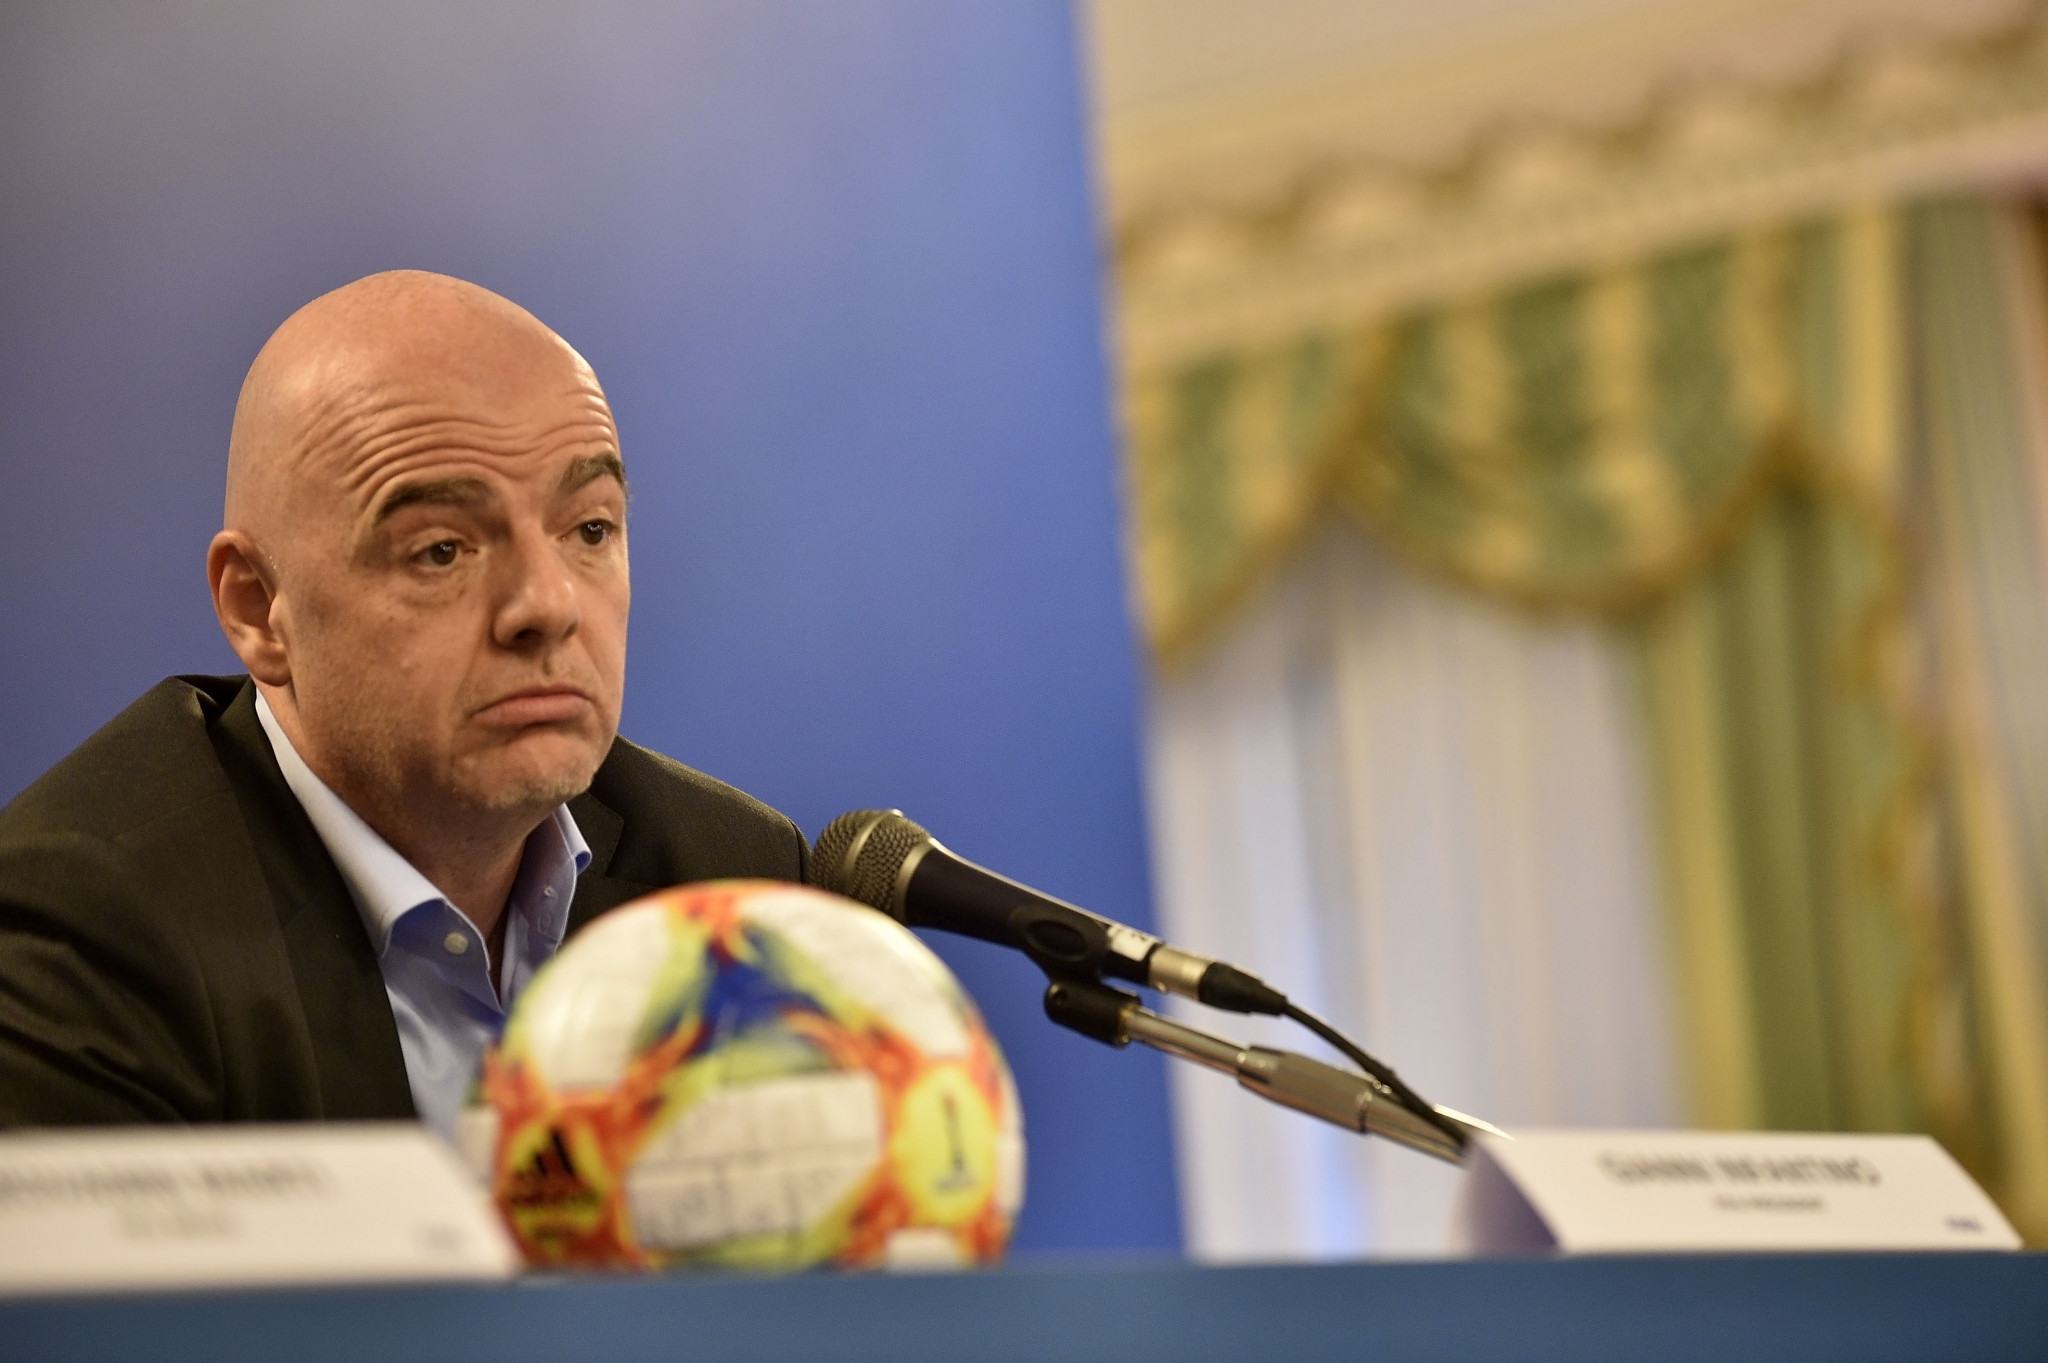 FIFA President Gianni Infantino has been accused of influencing the Ethics Commission, allegations which he denies ©Getty Images